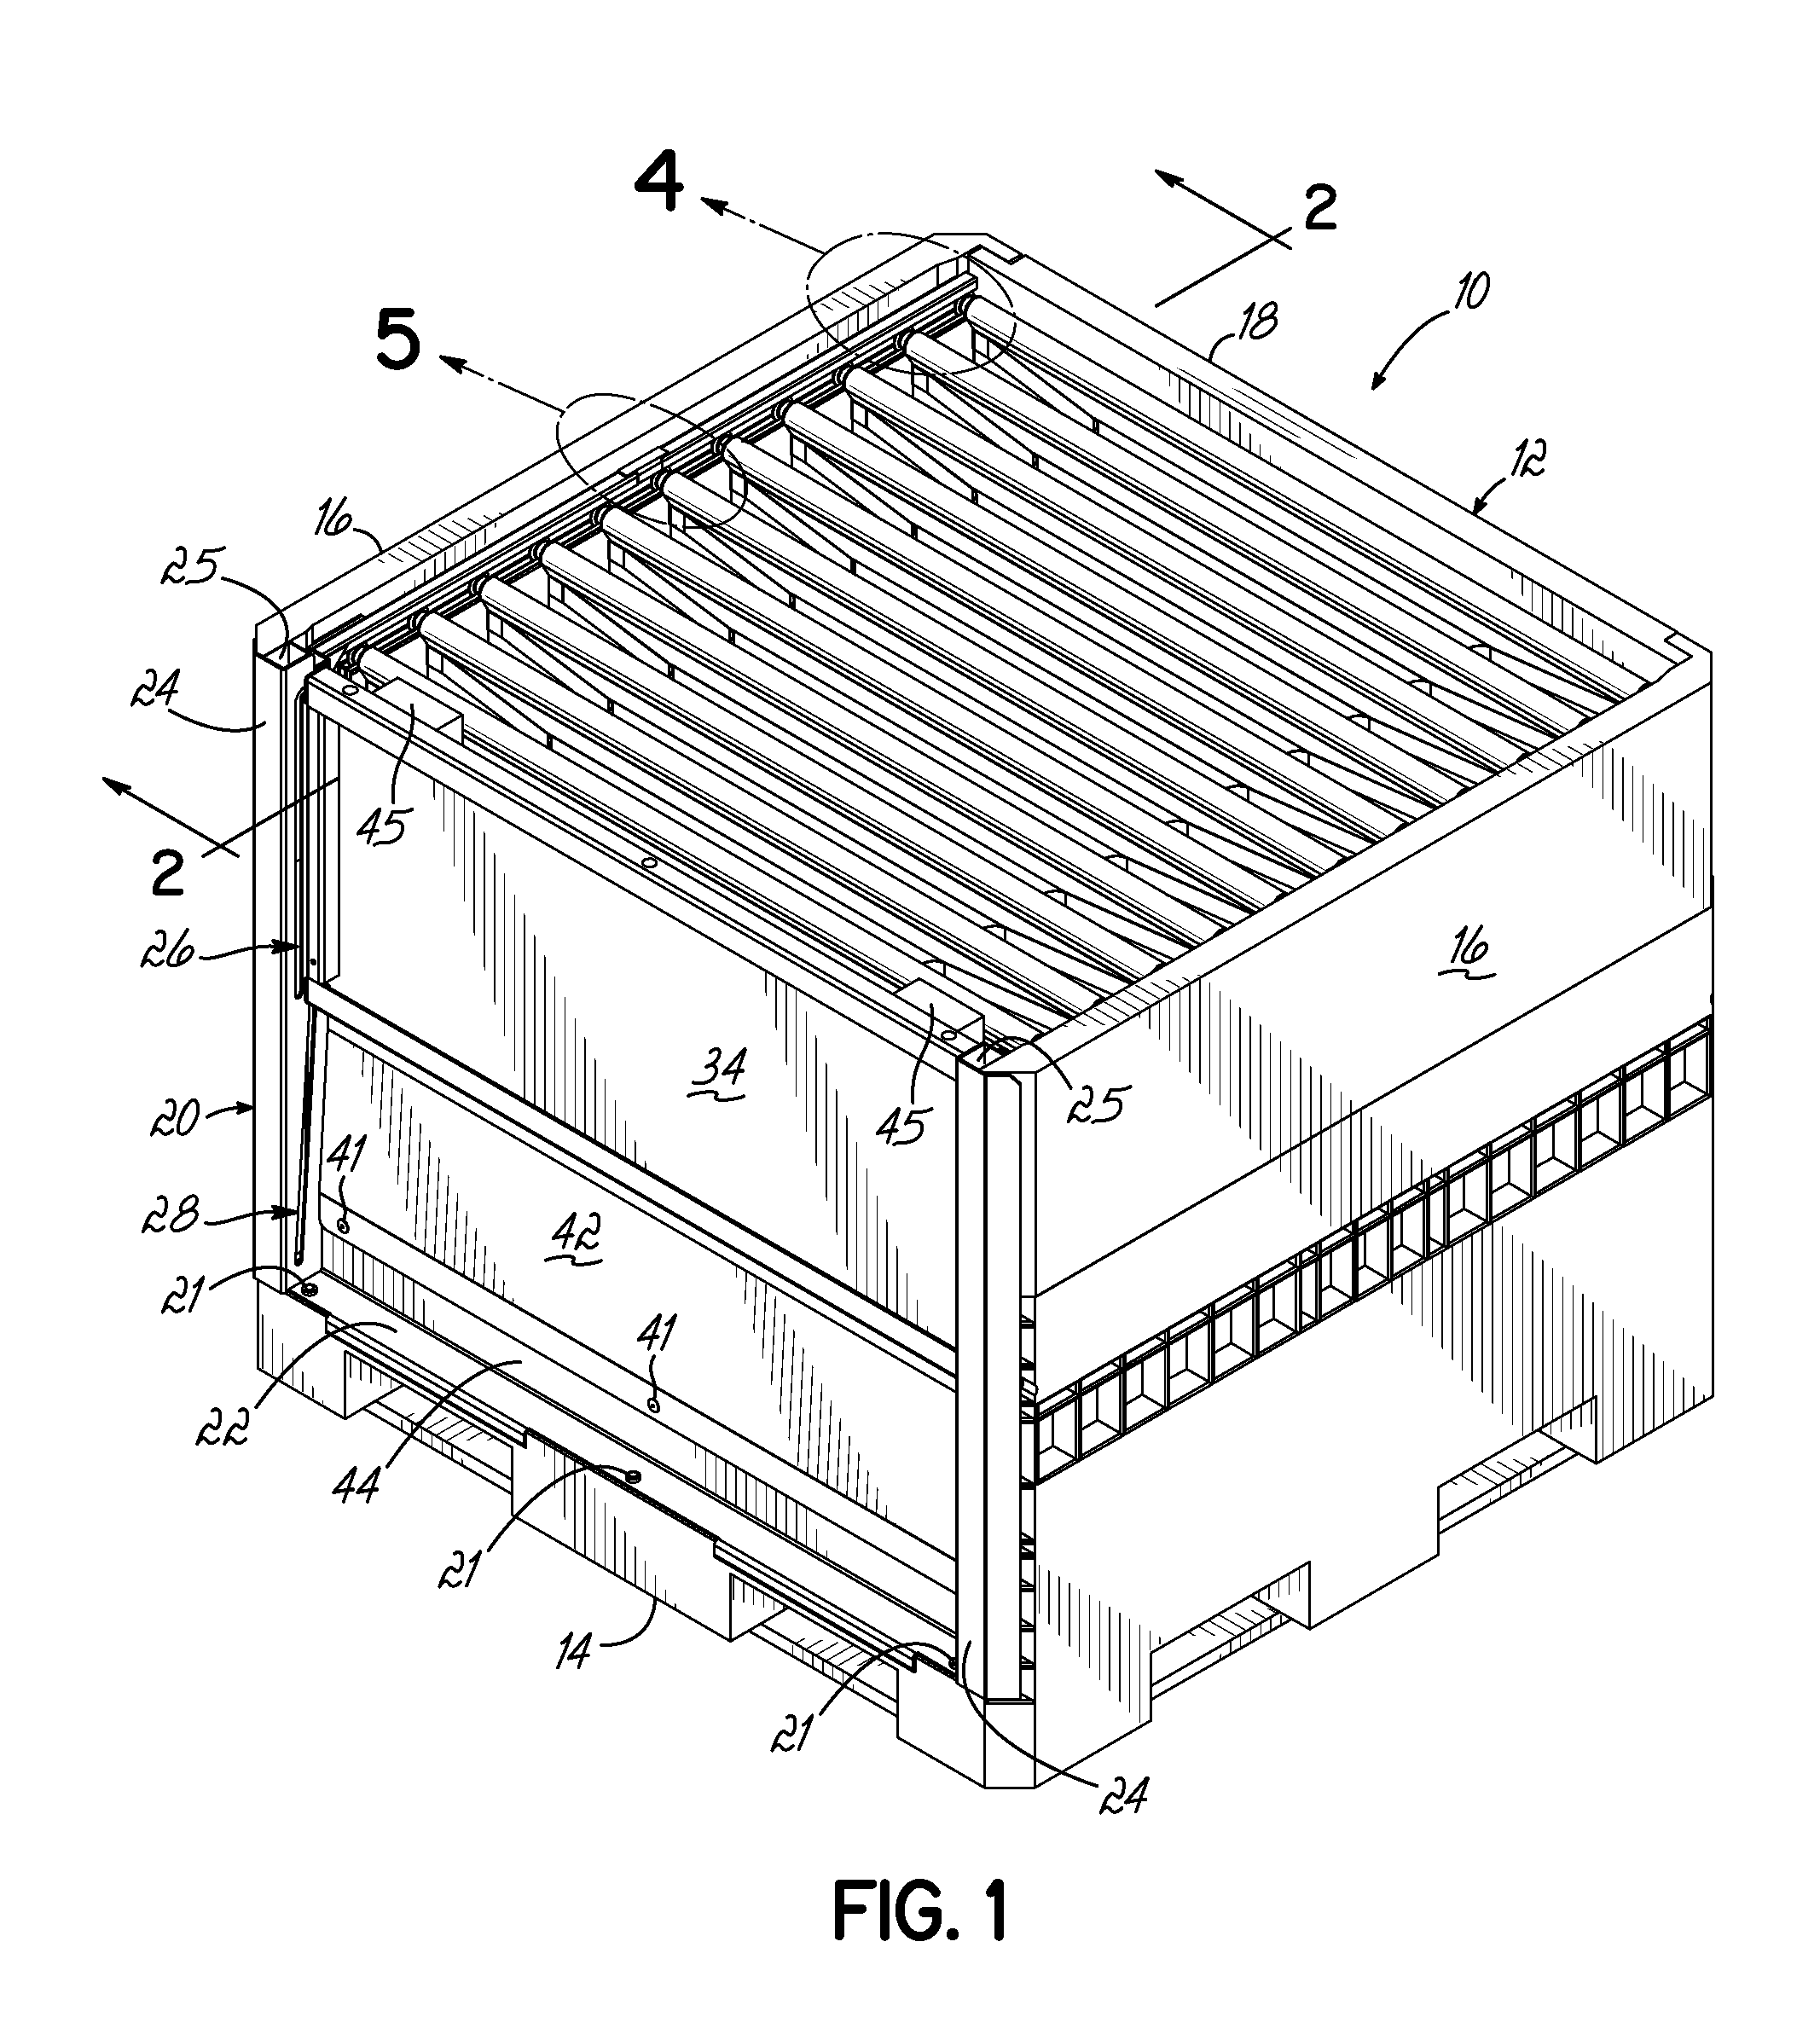 Container having metal outer frame for supporting L-shaped tracks